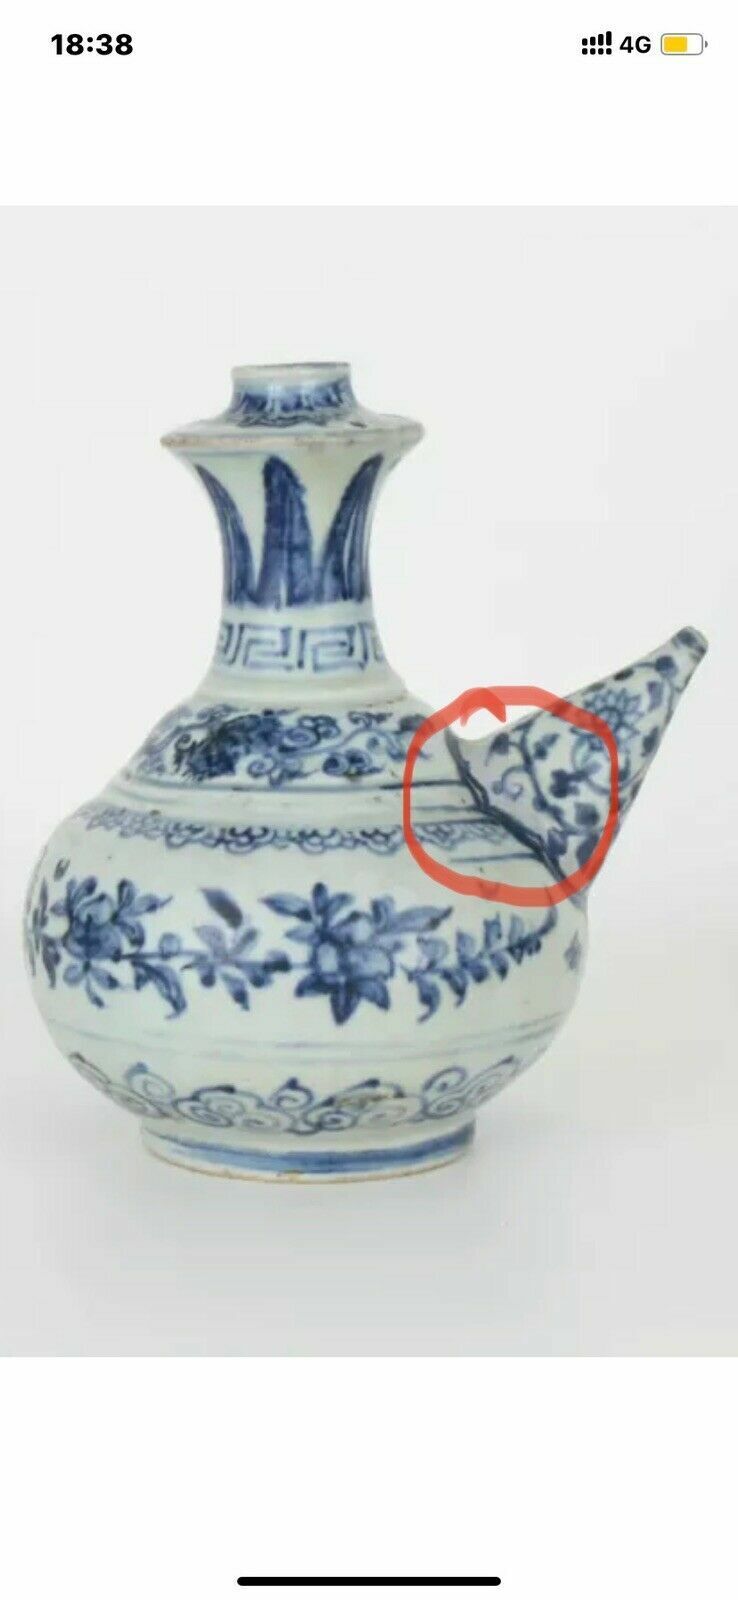 16th C Chinese Ming Dynasty Annamese Blue and White Porcelain Kendi Ewer Pot